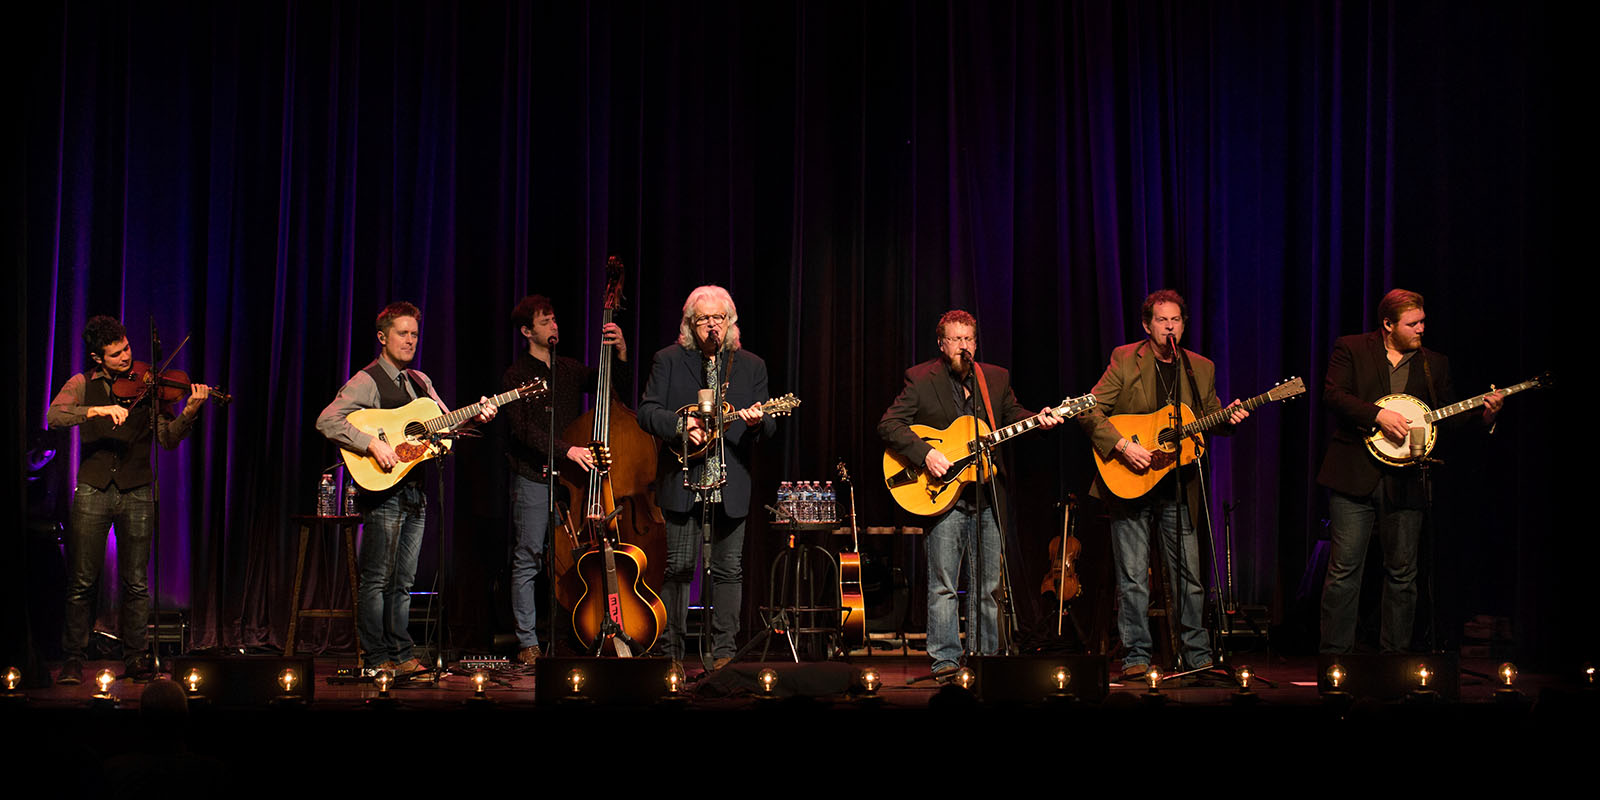 Ricky Skaggs and Kentucky Thunder with guitars as they perform on stage.